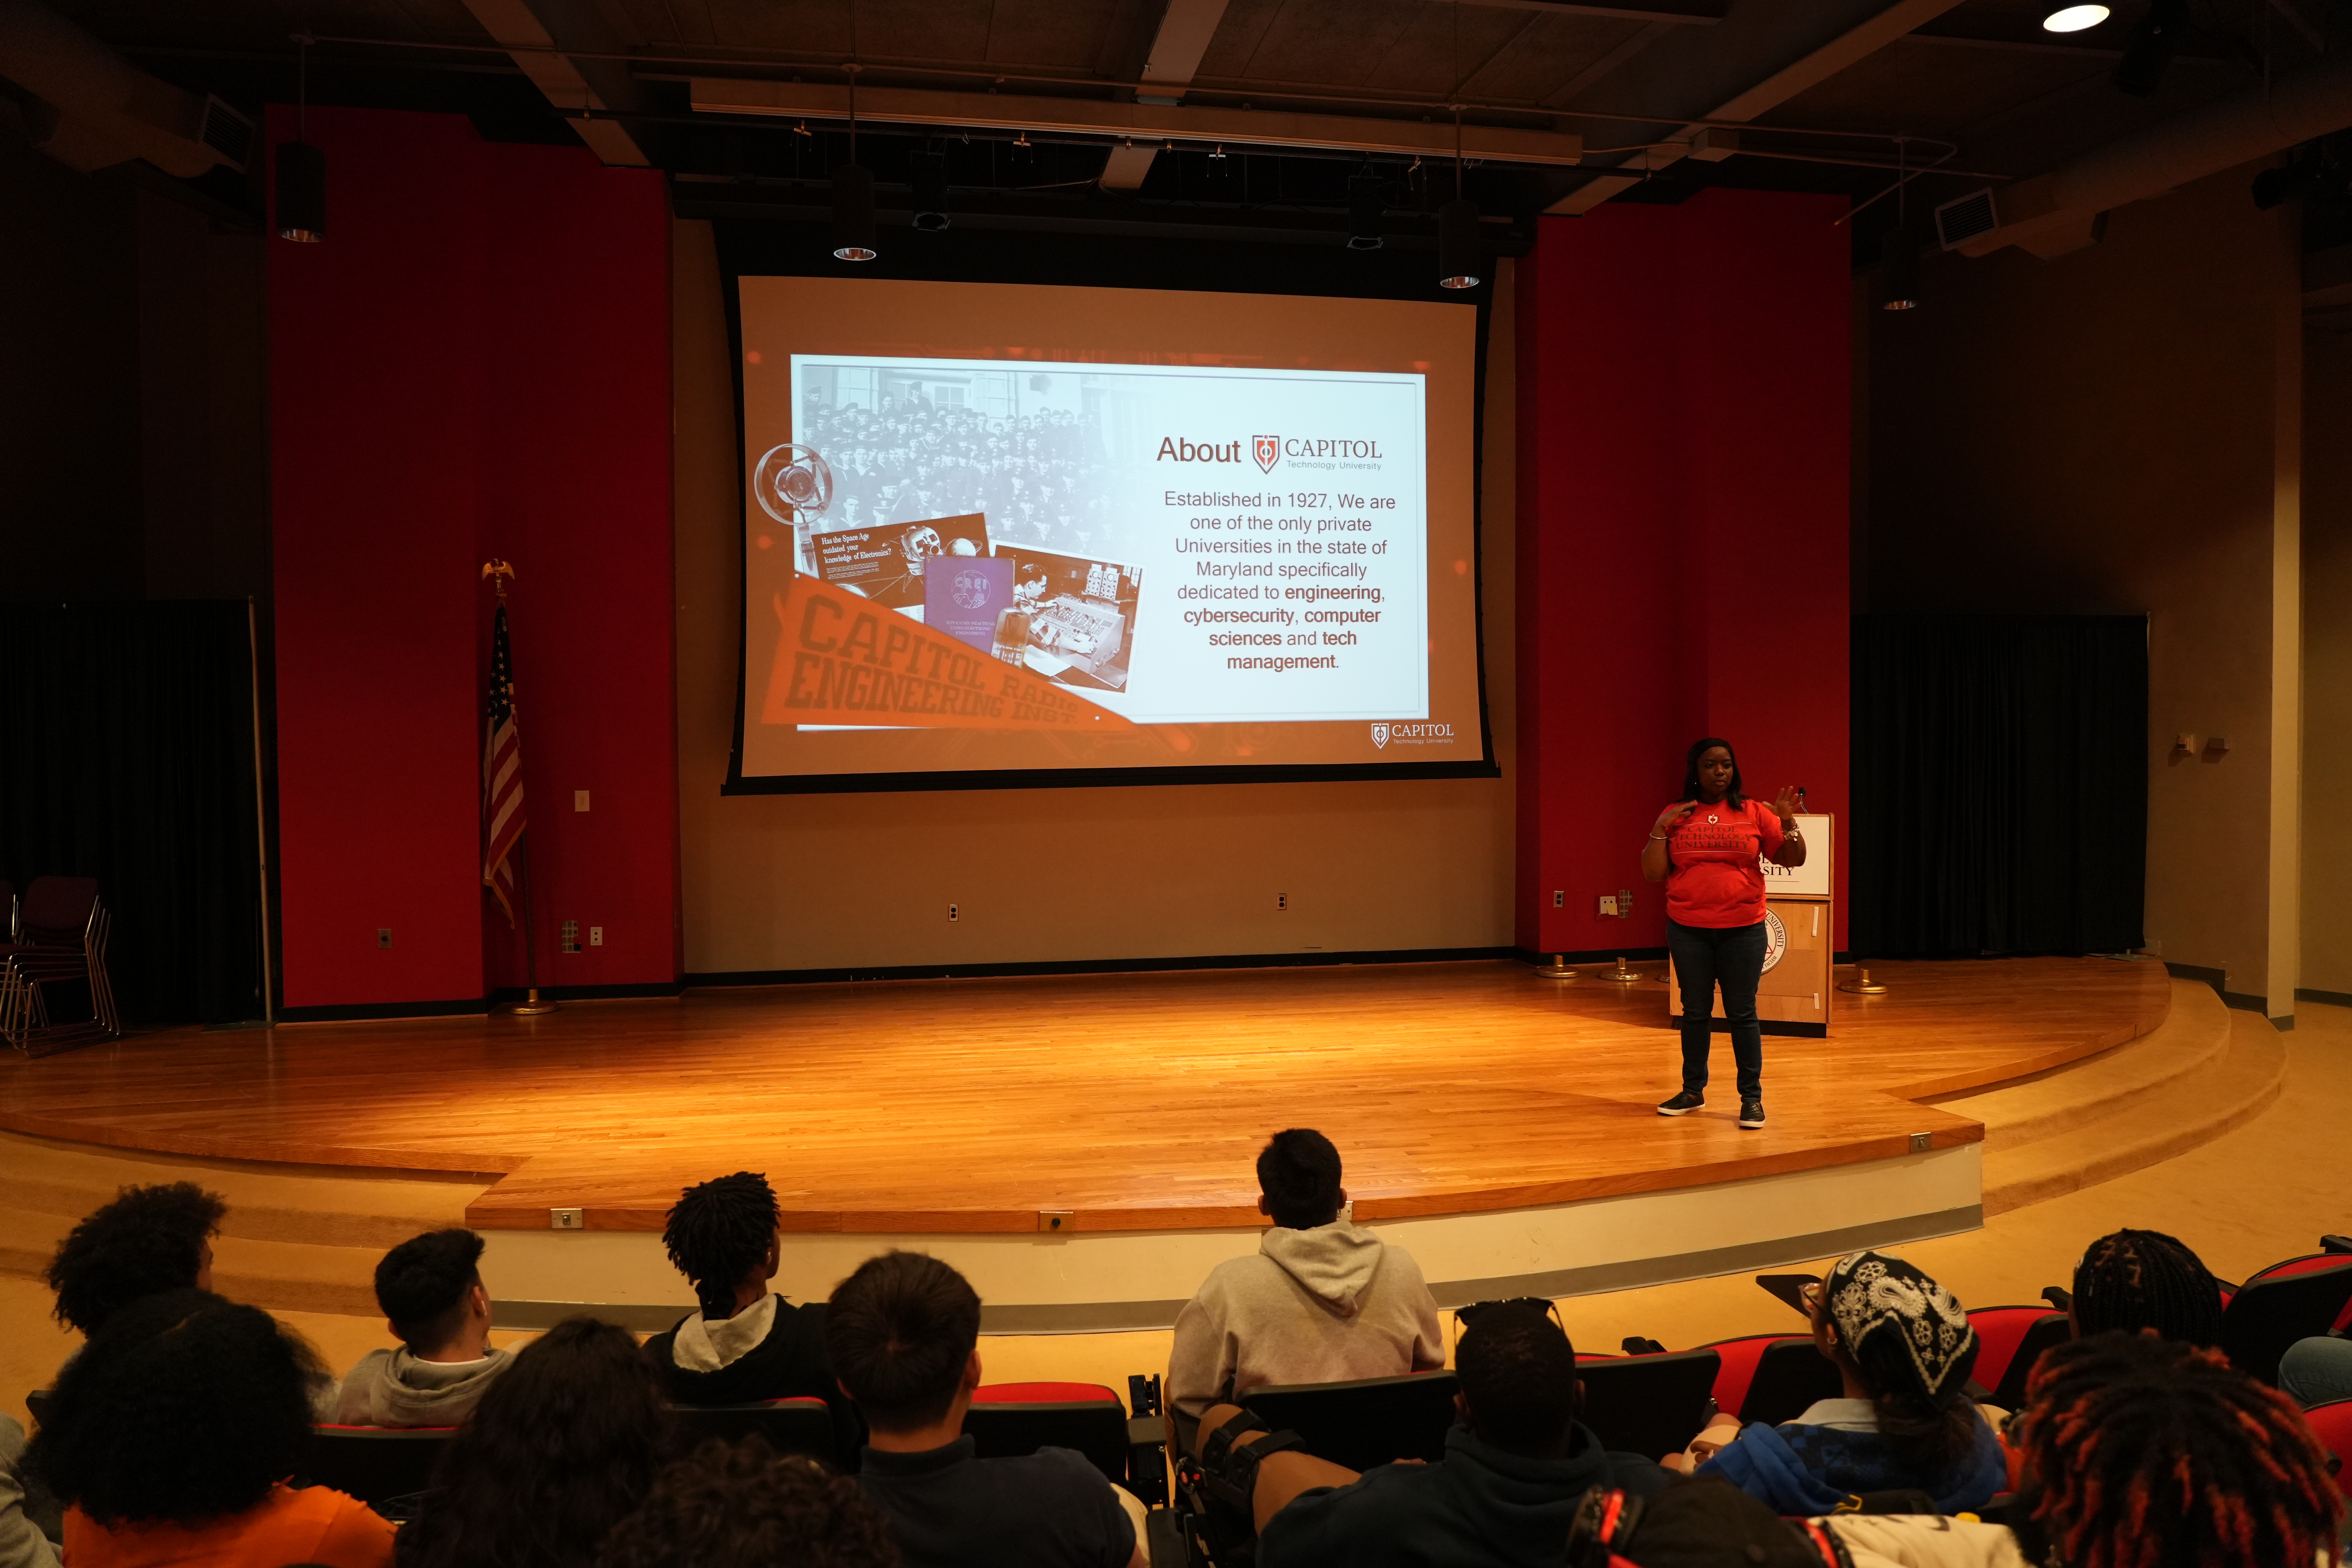 CapTech Connect! Welcomes Students to Capitol in Auditorium Setting with Dr. Angel Clay